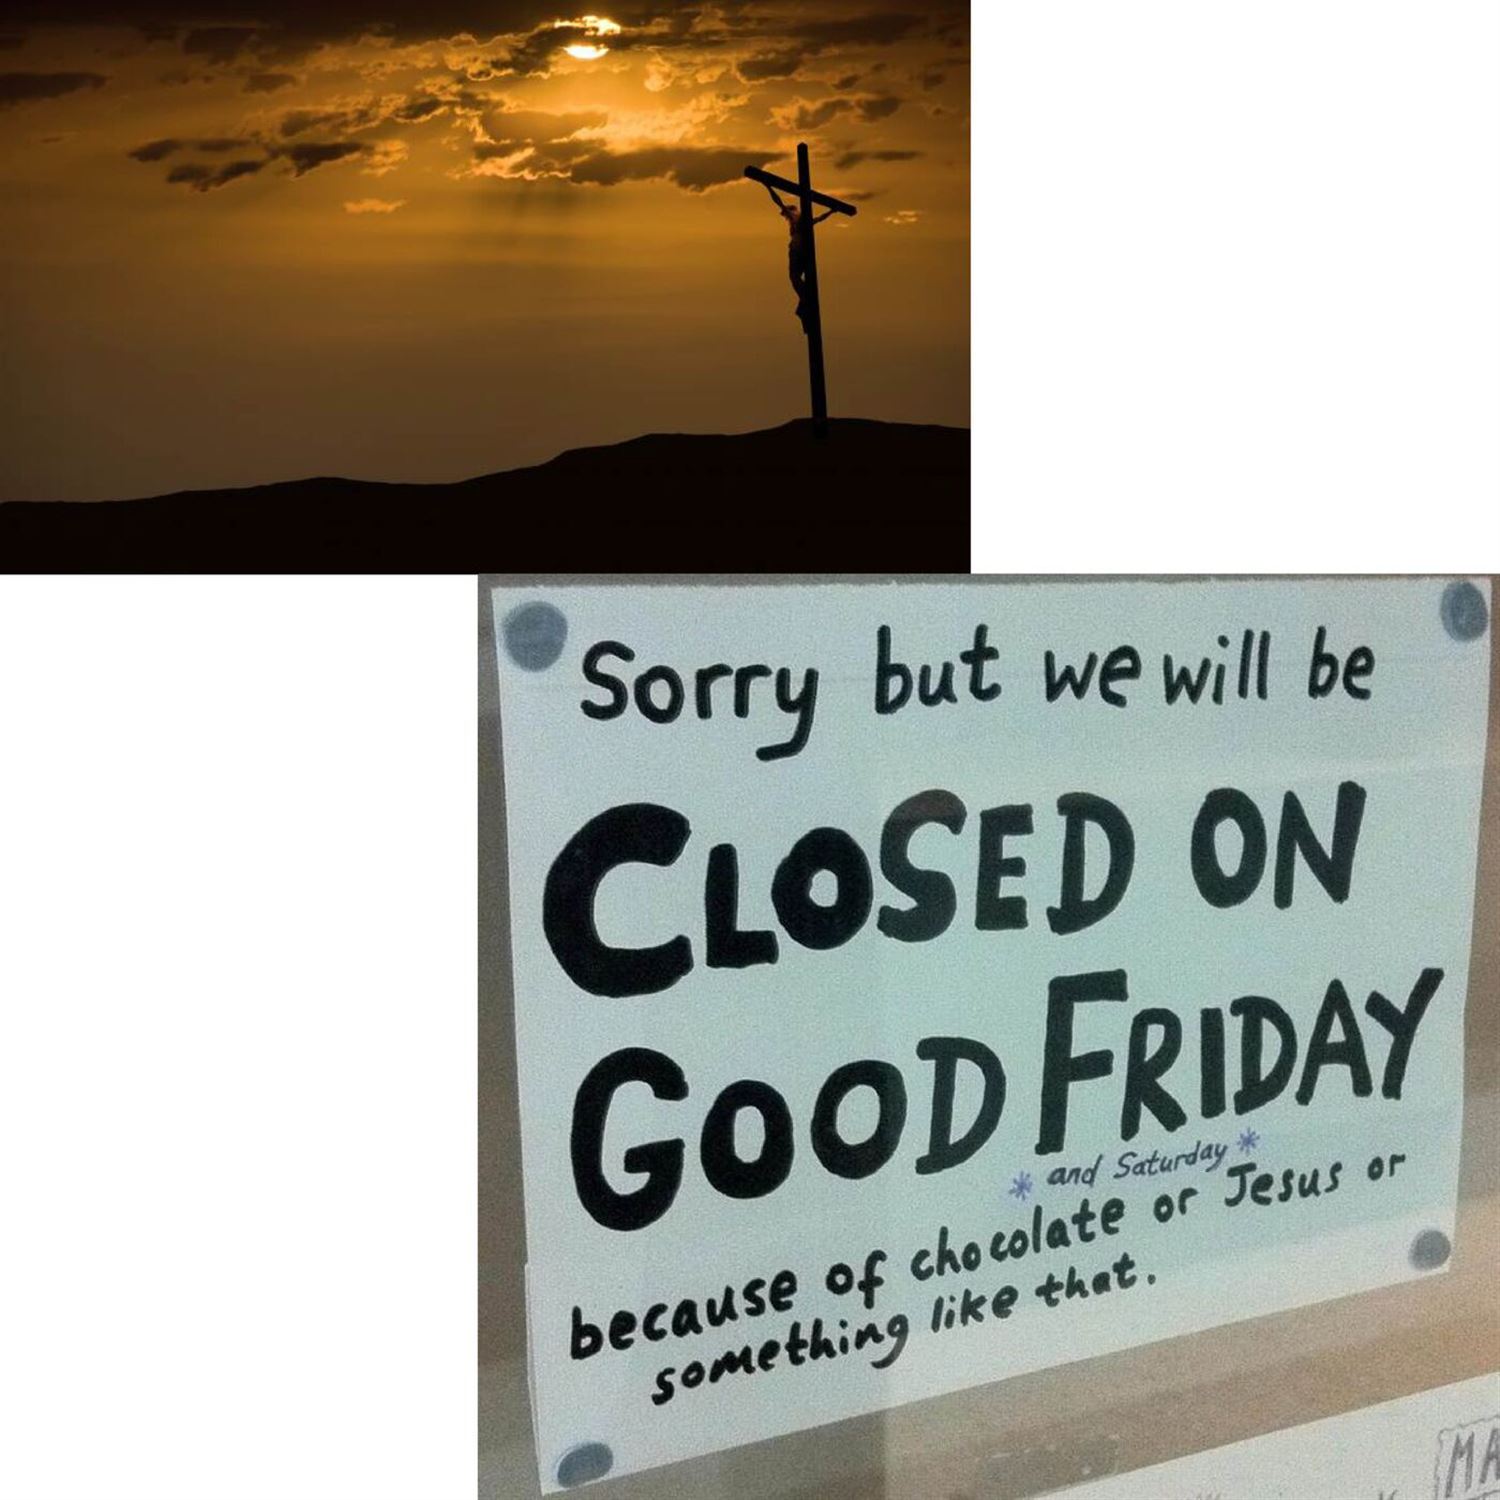 Self restriction on Good Friday